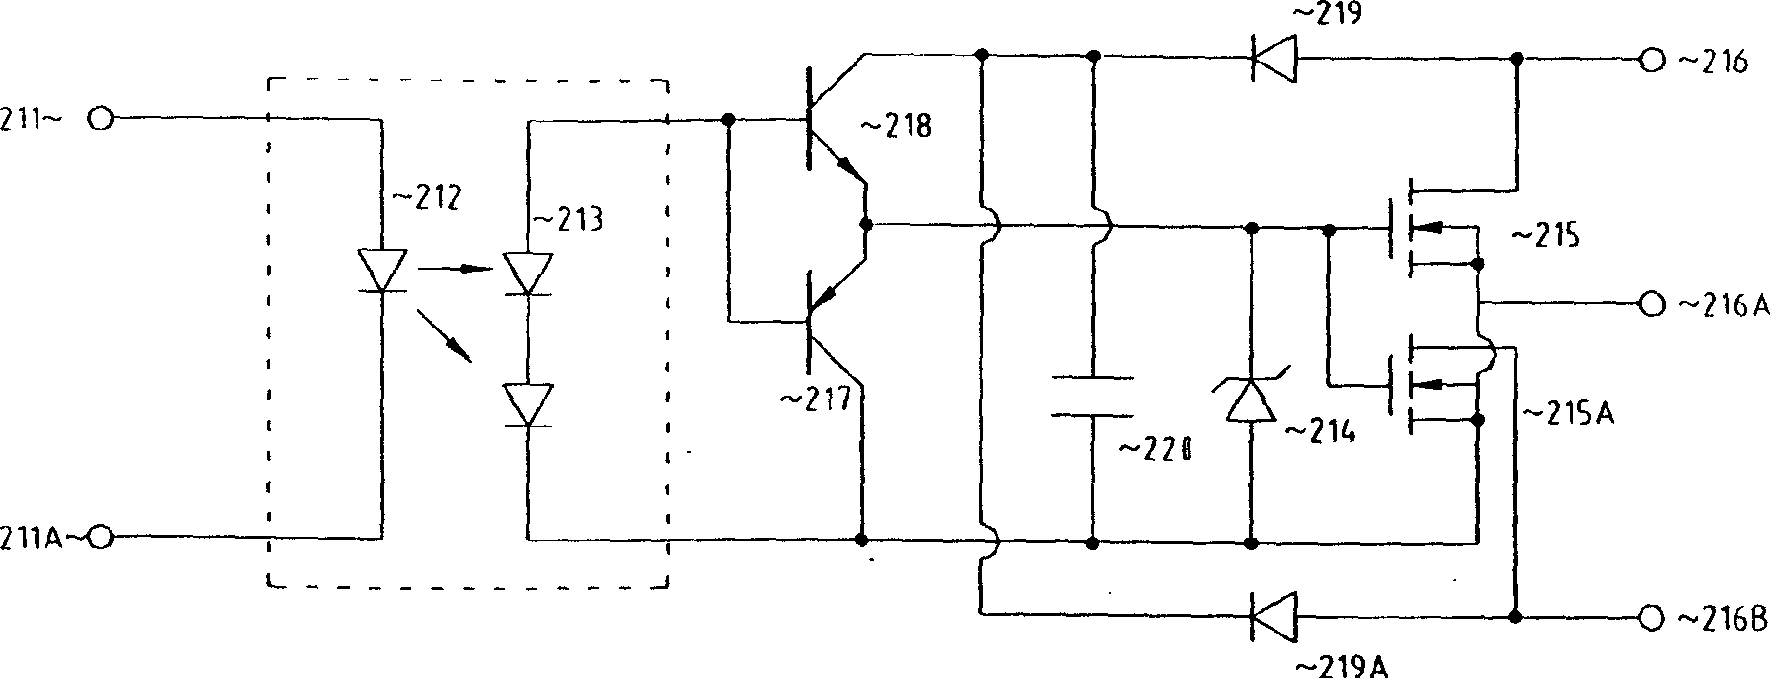 Normal open type solid-state relay in high-speed switch